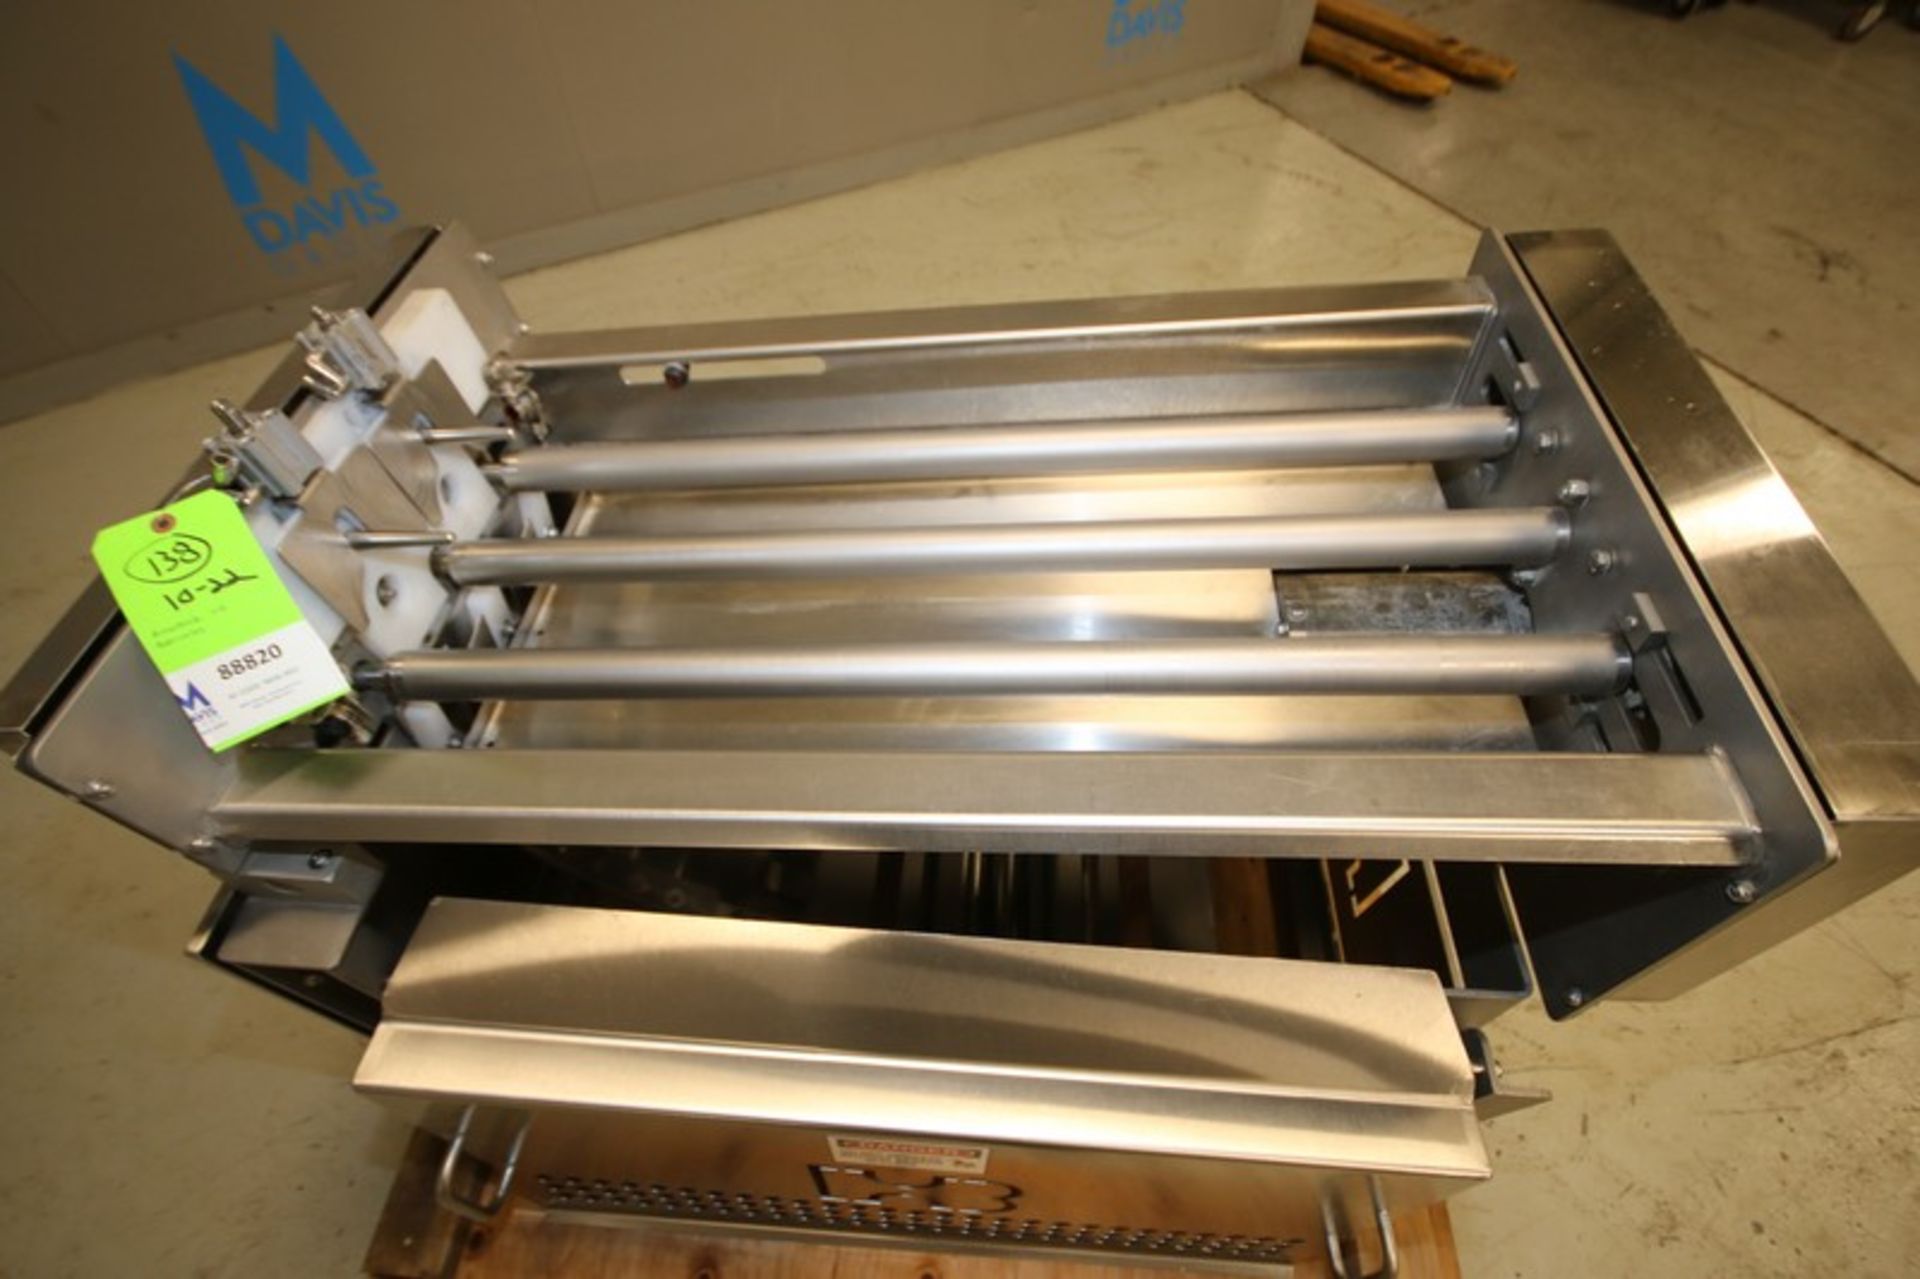 Hinds-bock S/S Lid Applicator For Cup Filling Line (INV#88820)(Located @ the MDG Showroom in Pgh., - Image 3 of 6